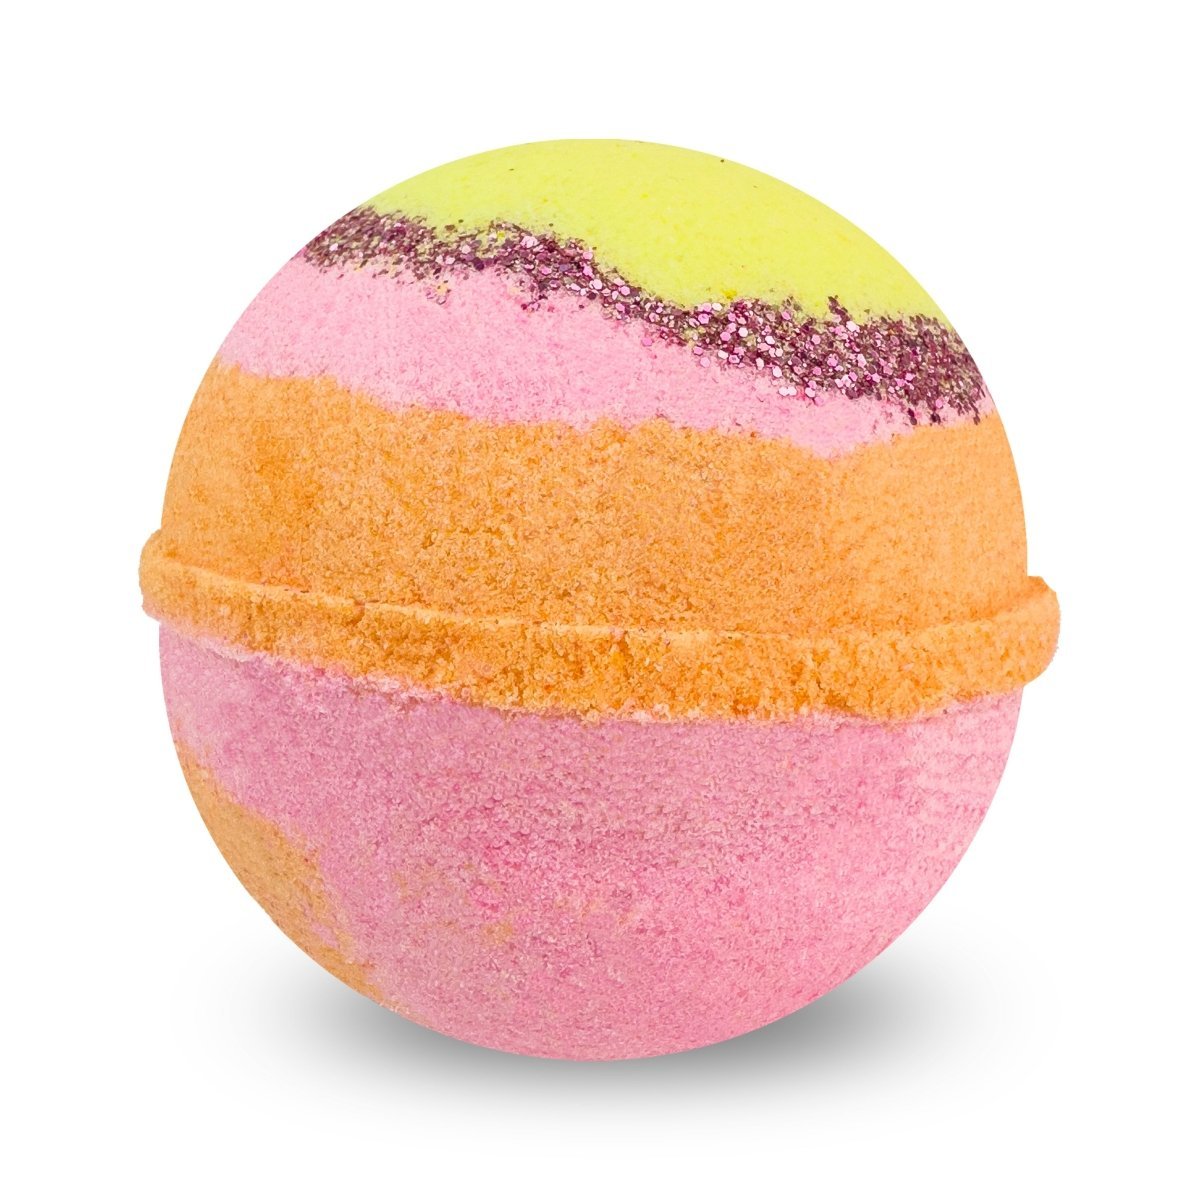 Floating Lotus Bath Bomb for Kids & Adults - Colourful Glitters, Lotus Fragrance & Soy Milk - Made in Australia by Bath Box